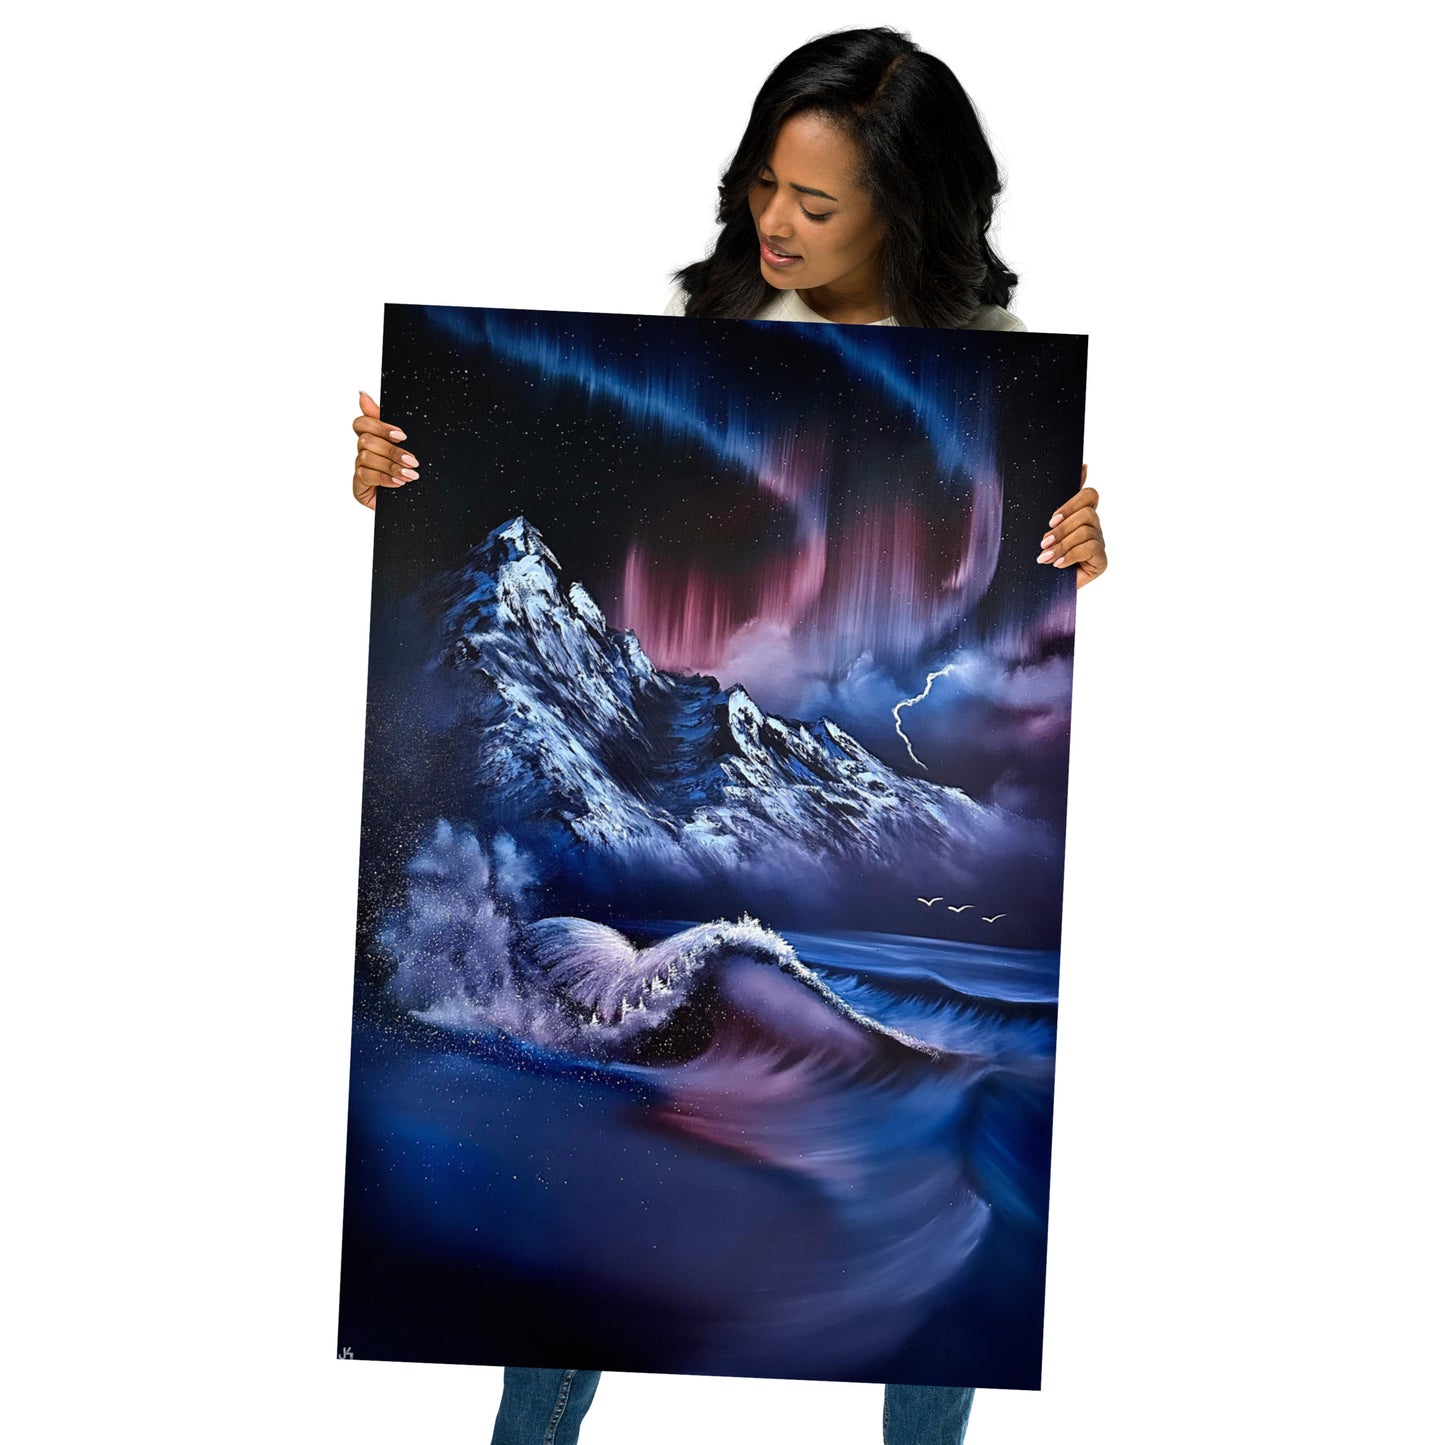 Poster Print - Apls of the Aurora&#39;s - from Painting 861 Aurora Borealis Seascape by PaintWithJosh